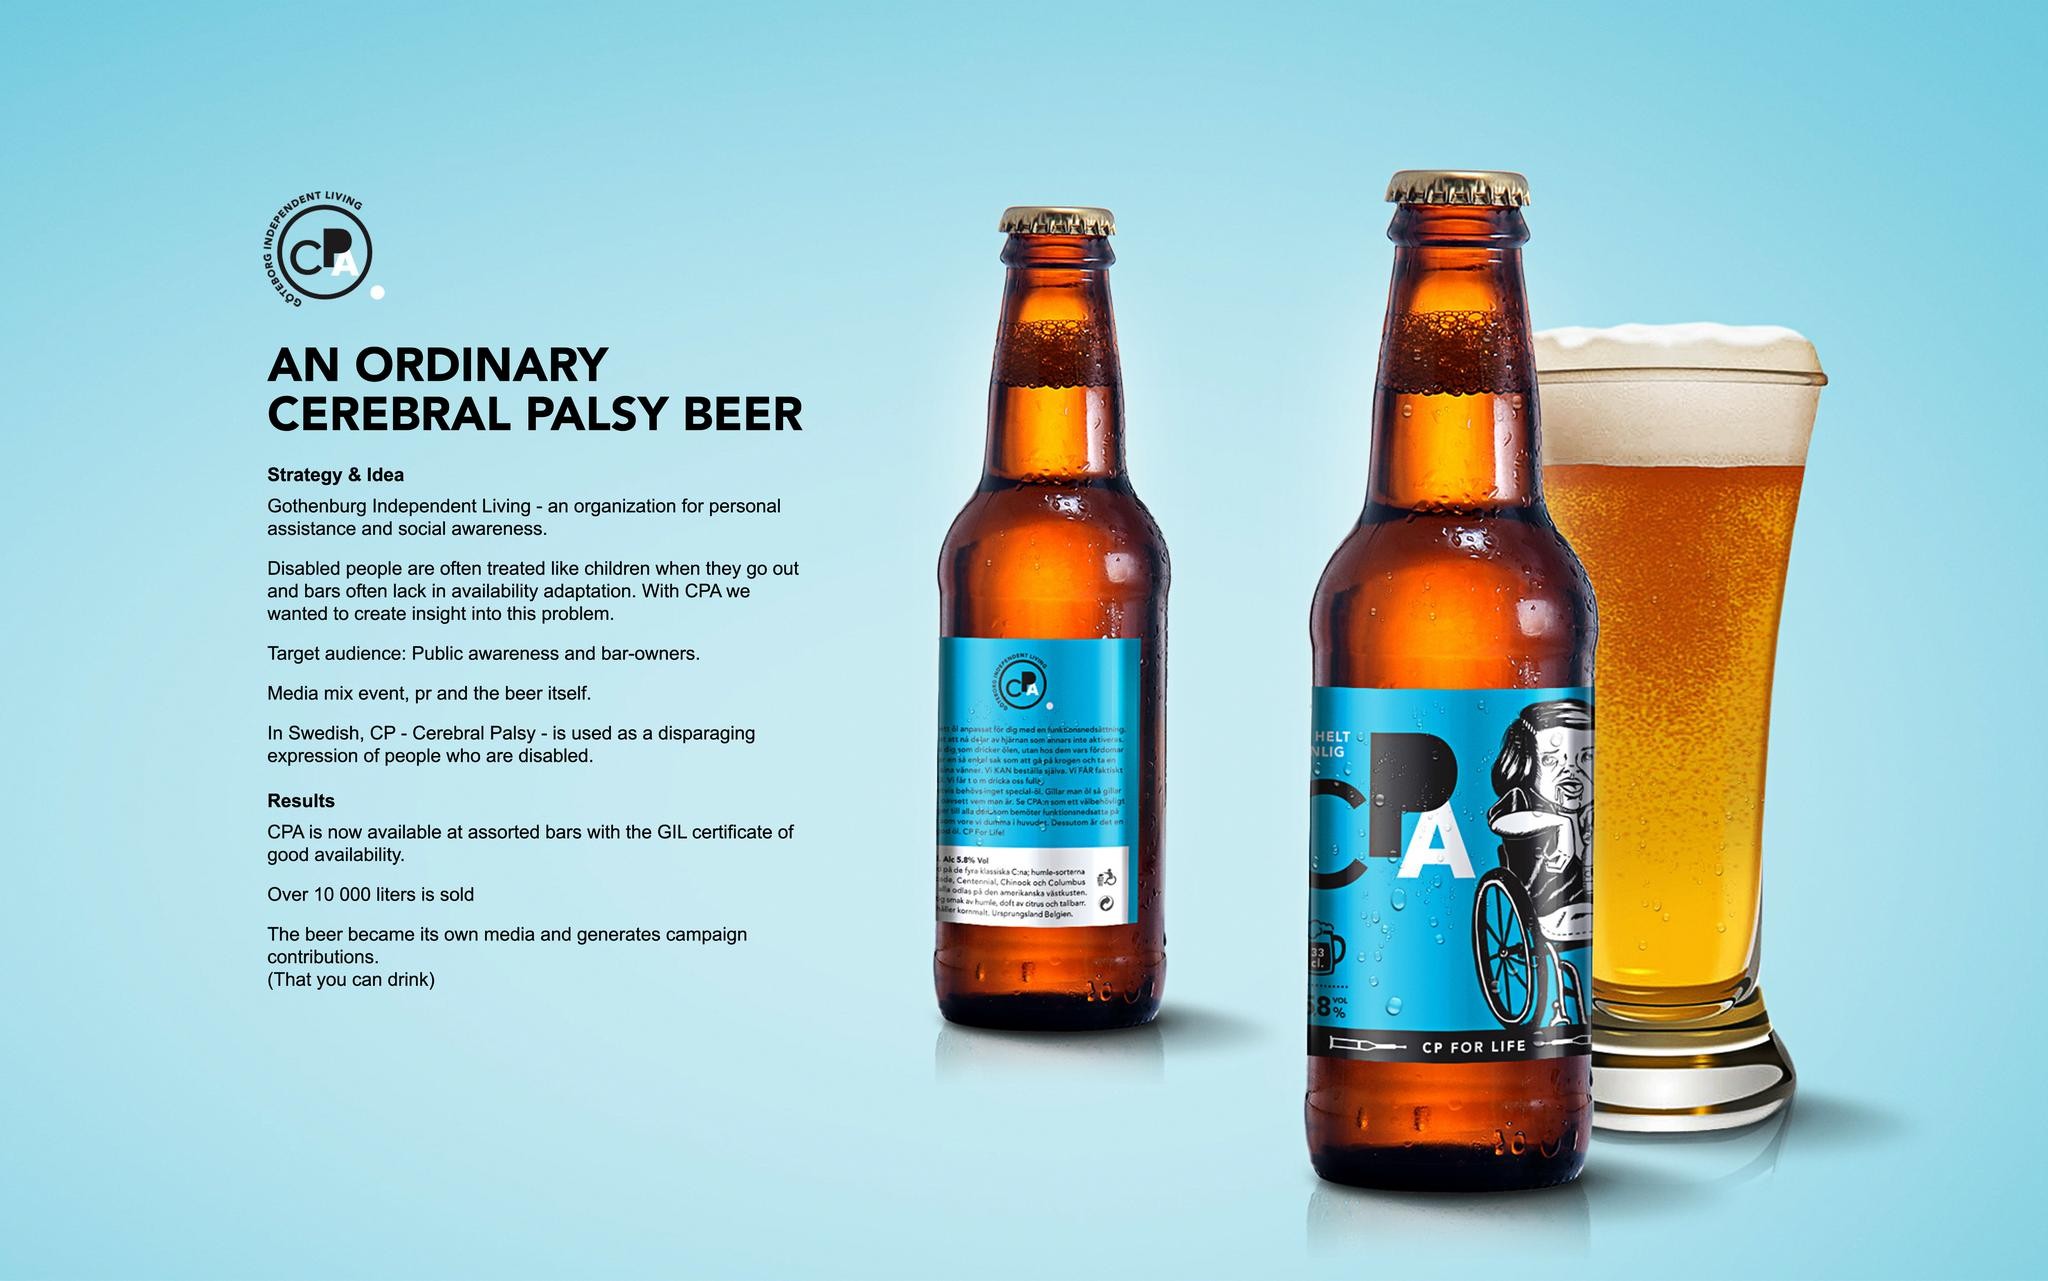 JUST ANOTHER CEREBRAL PALSY BEER